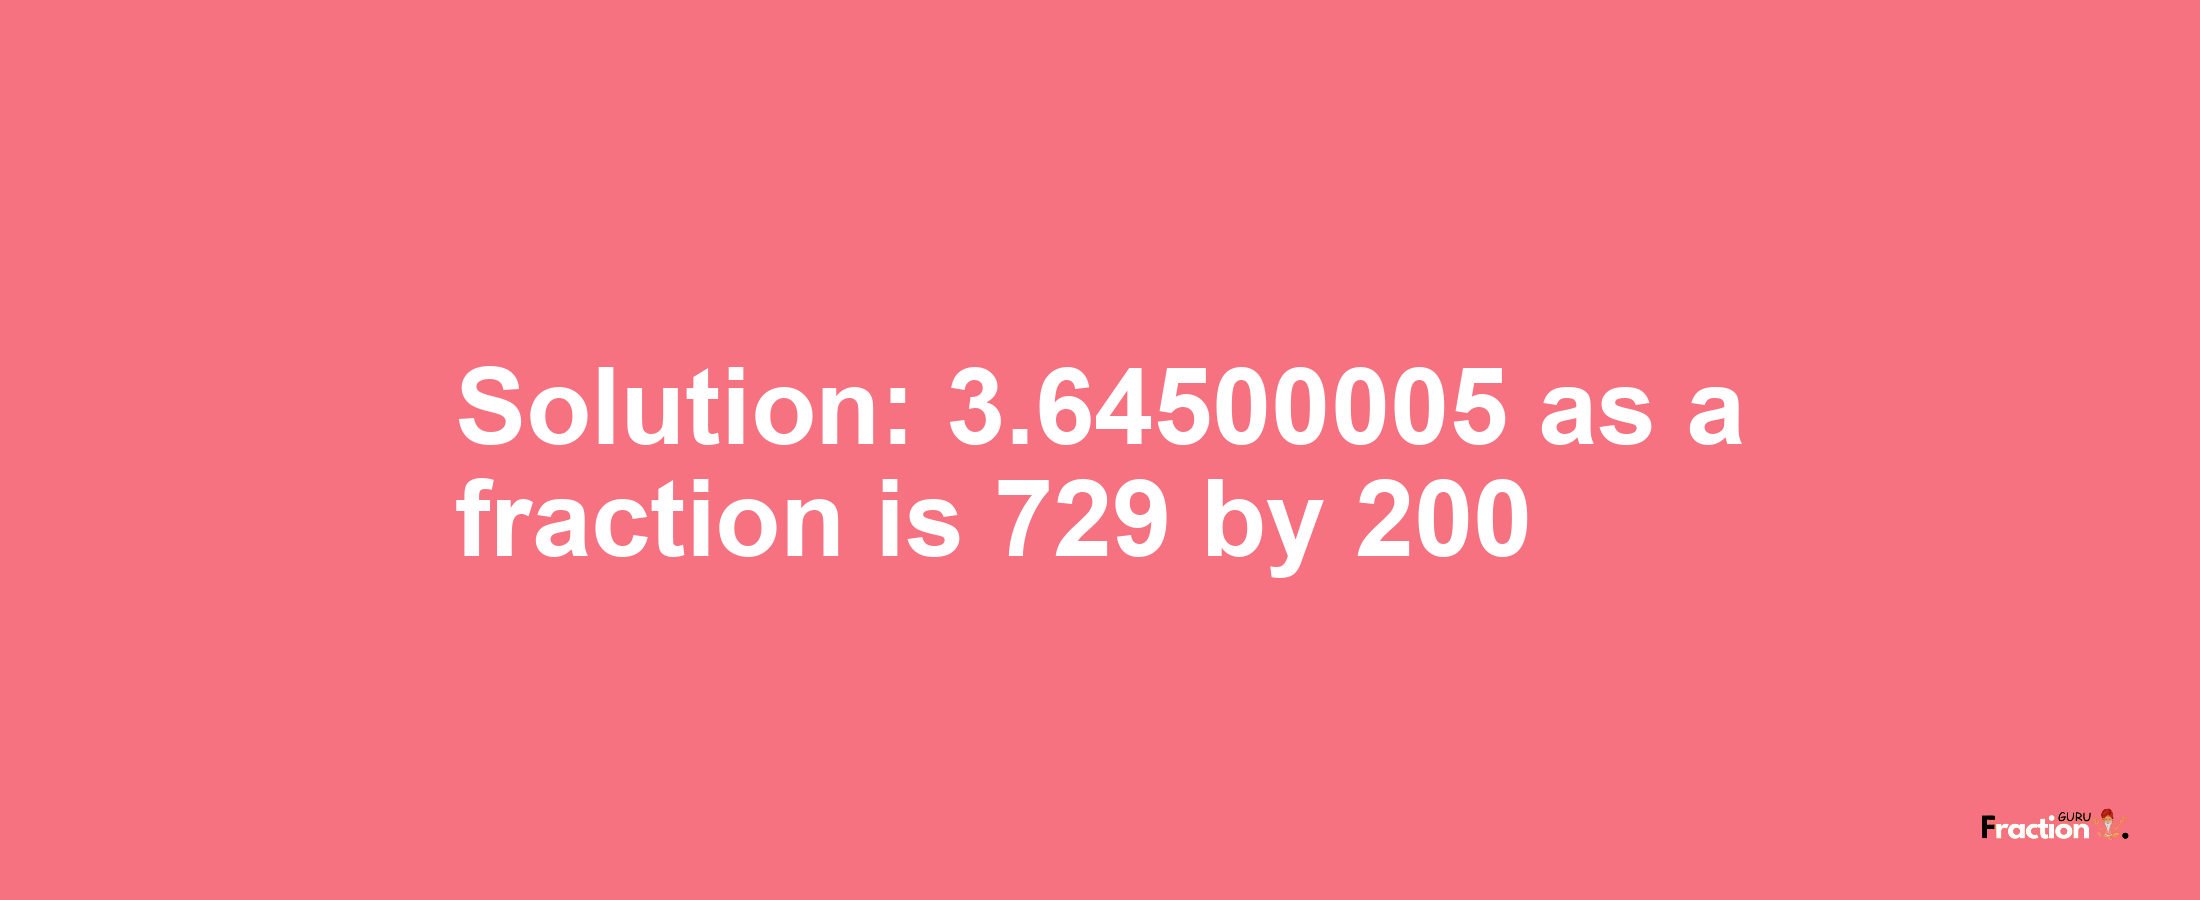 Solution:3.64500005 as a fraction is 729/200